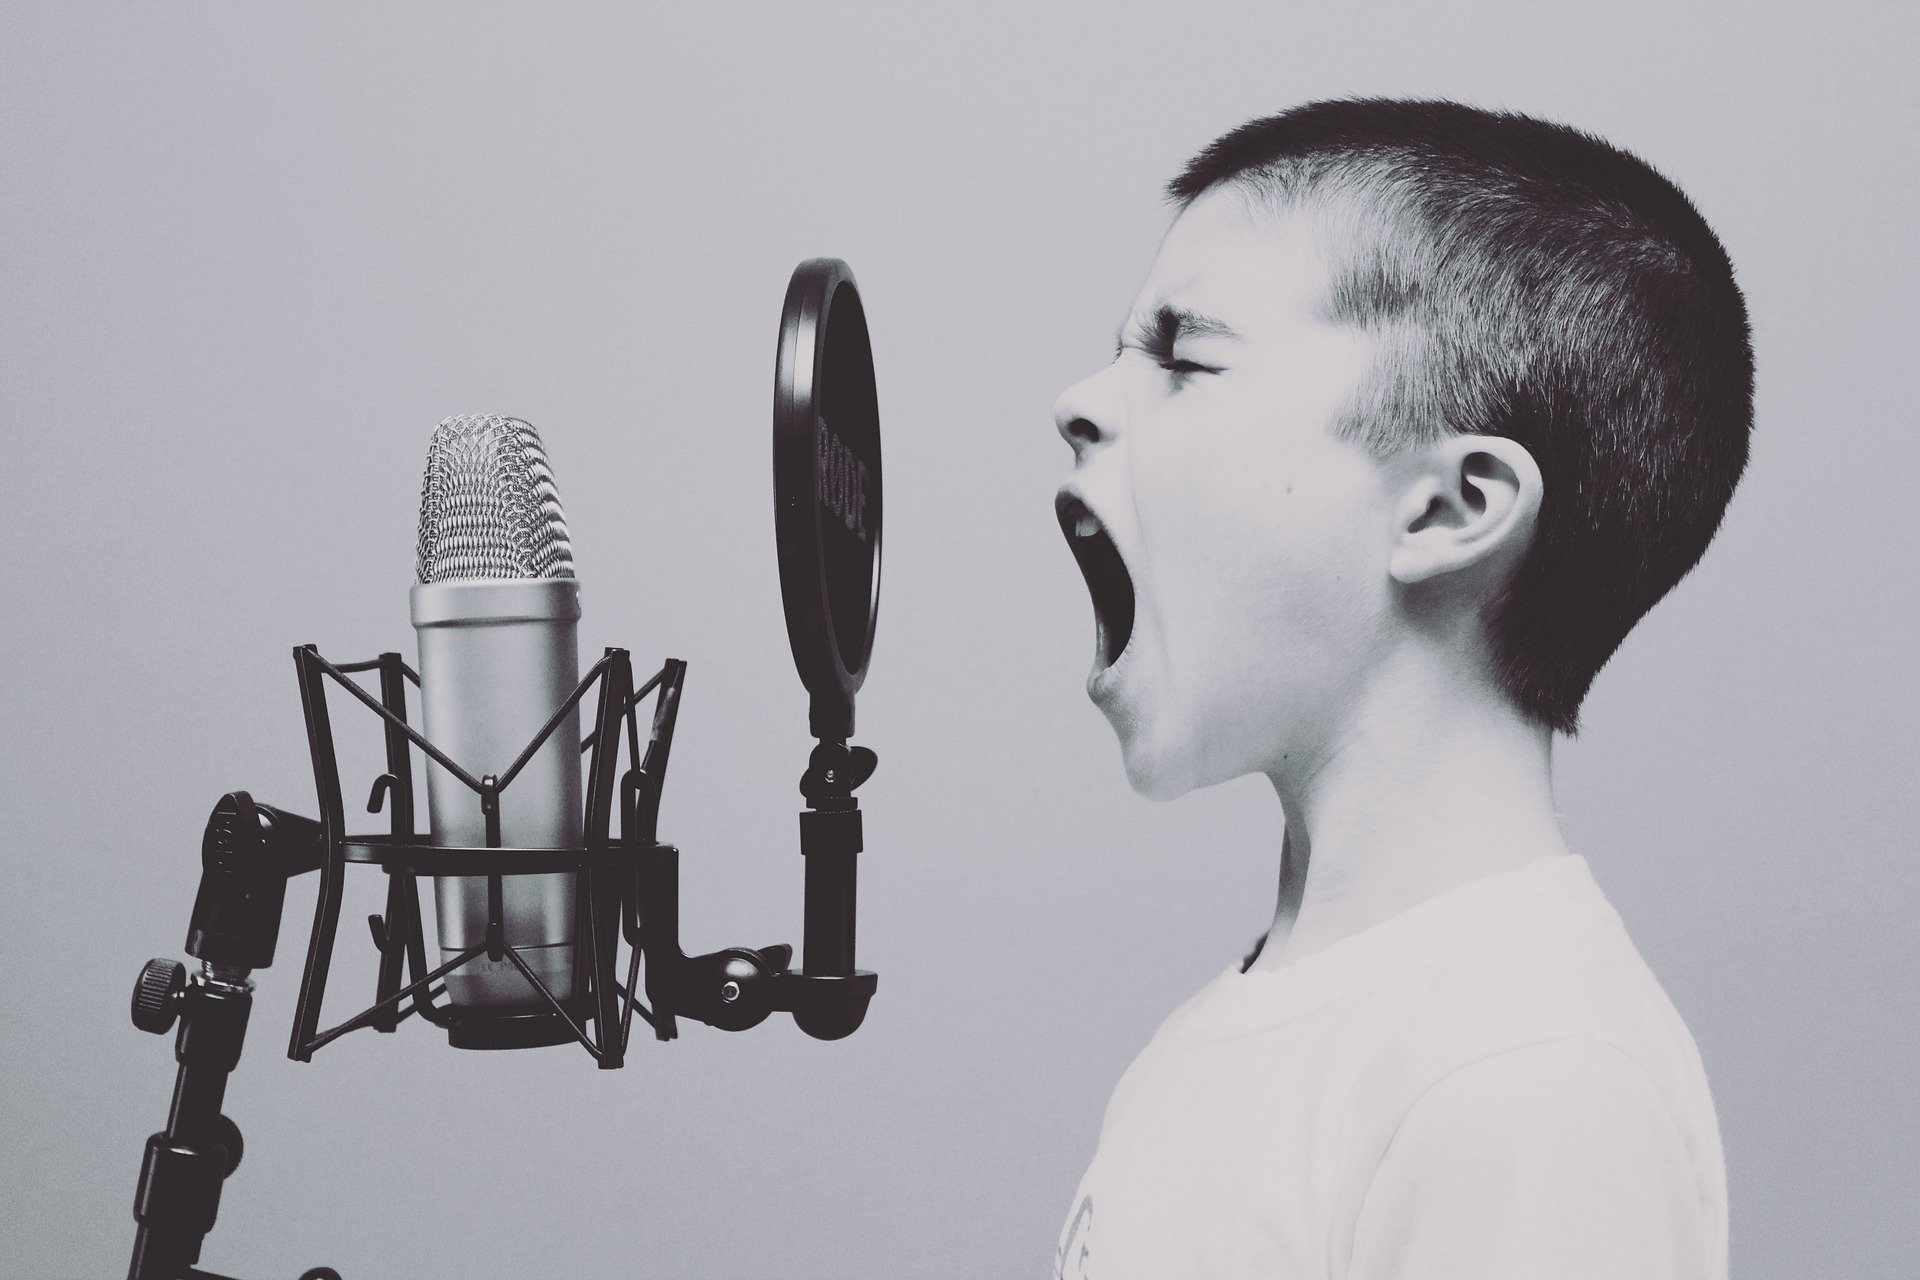 A young boy screaming into a microphone in a studio. | Source: Pixabay.